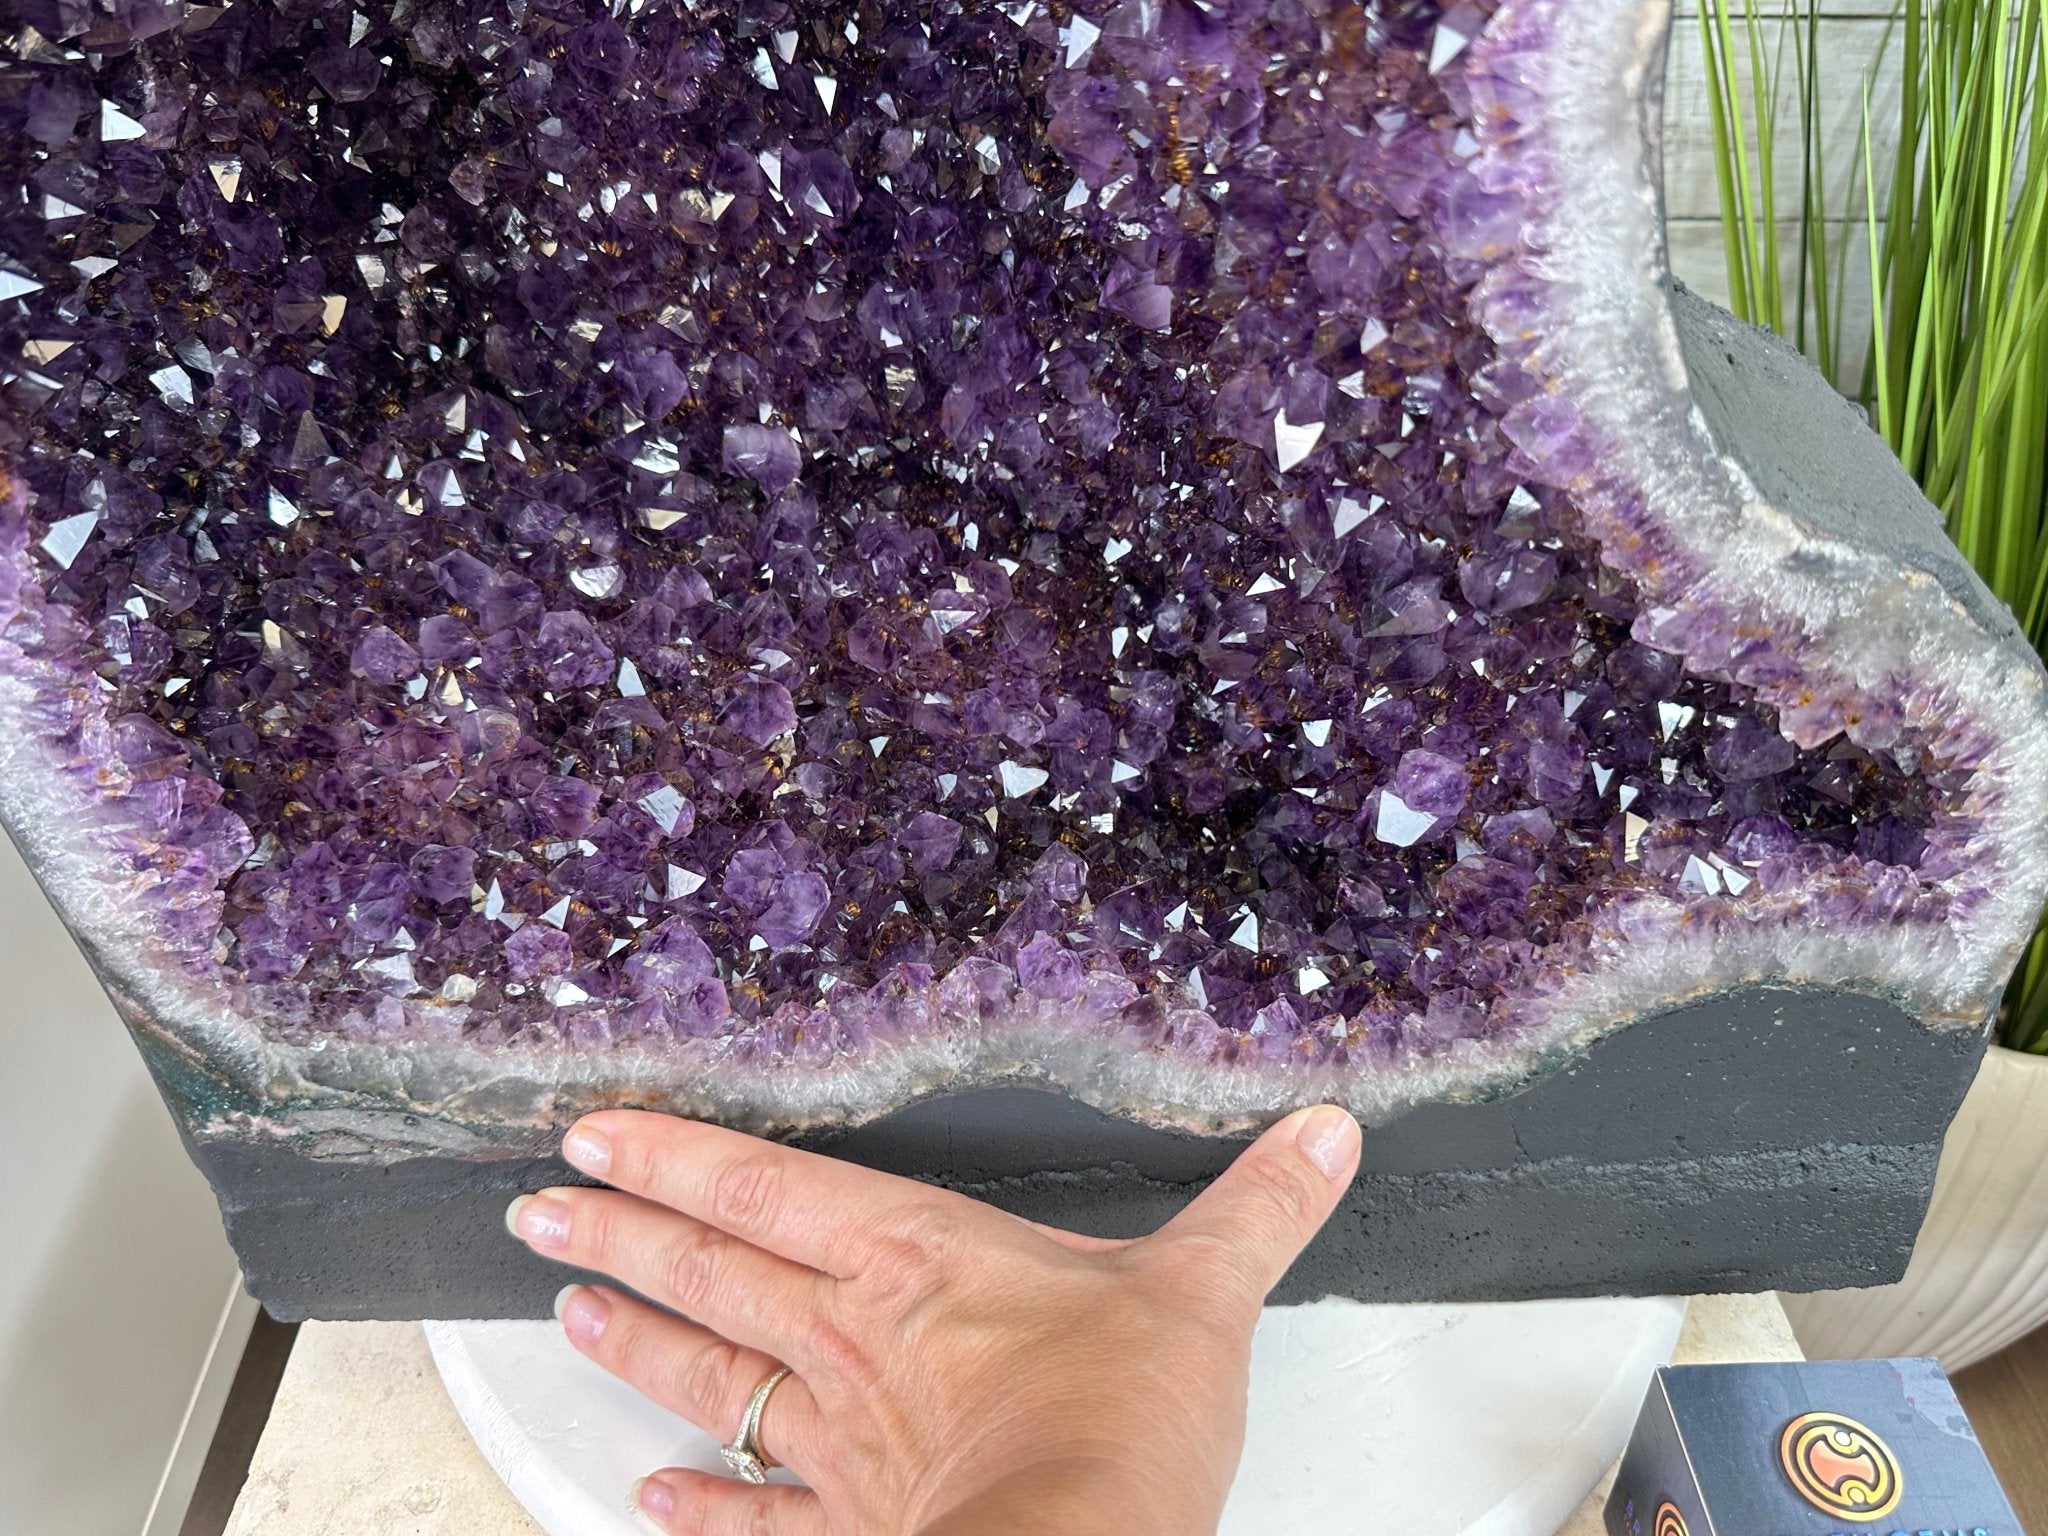 Super Quality Brazilian Amethyst Cathedral, 132 lbs & 28.4" Tall, Model #5601-1302 by Brazil Gems - Brazil GemsBrazil GemsSuper Quality Brazilian Amethyst Cathedral, 132 lbs & 28.4" Tall, Model #5601-1302 by Brazil GemsCathedrals5601-1302